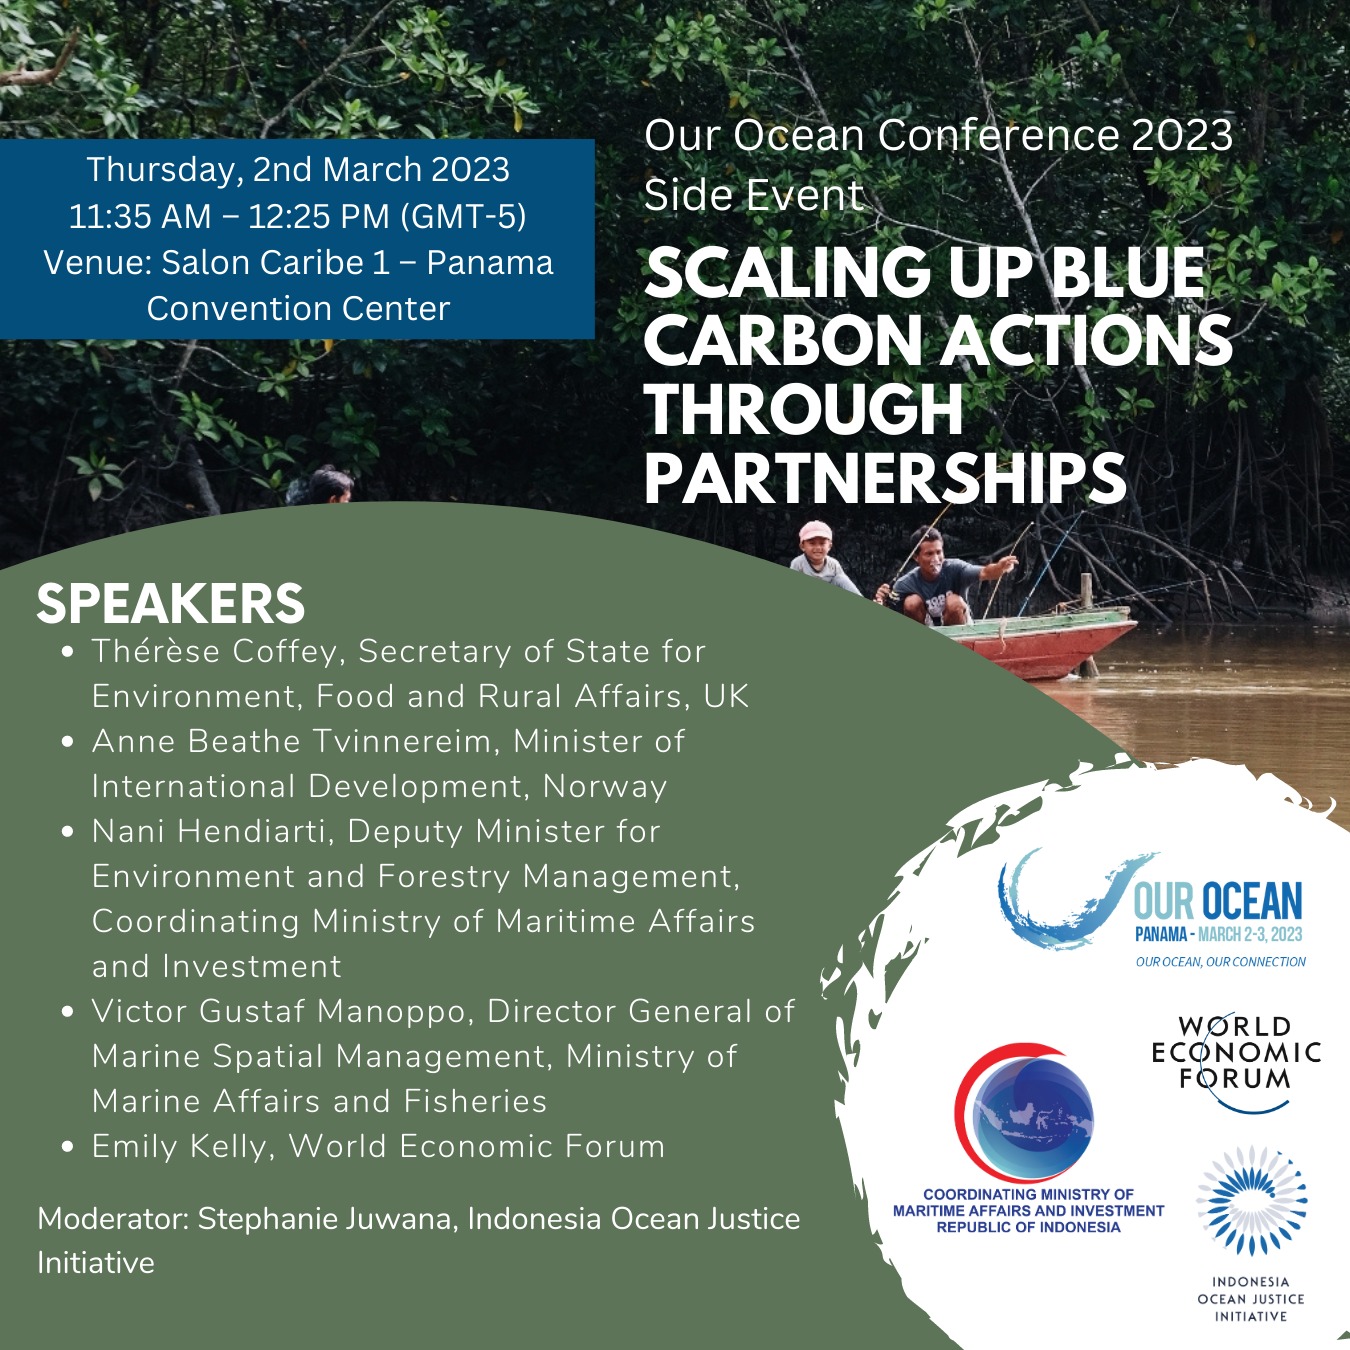 Scaling Up Blue Carbon Actions through Partnerships